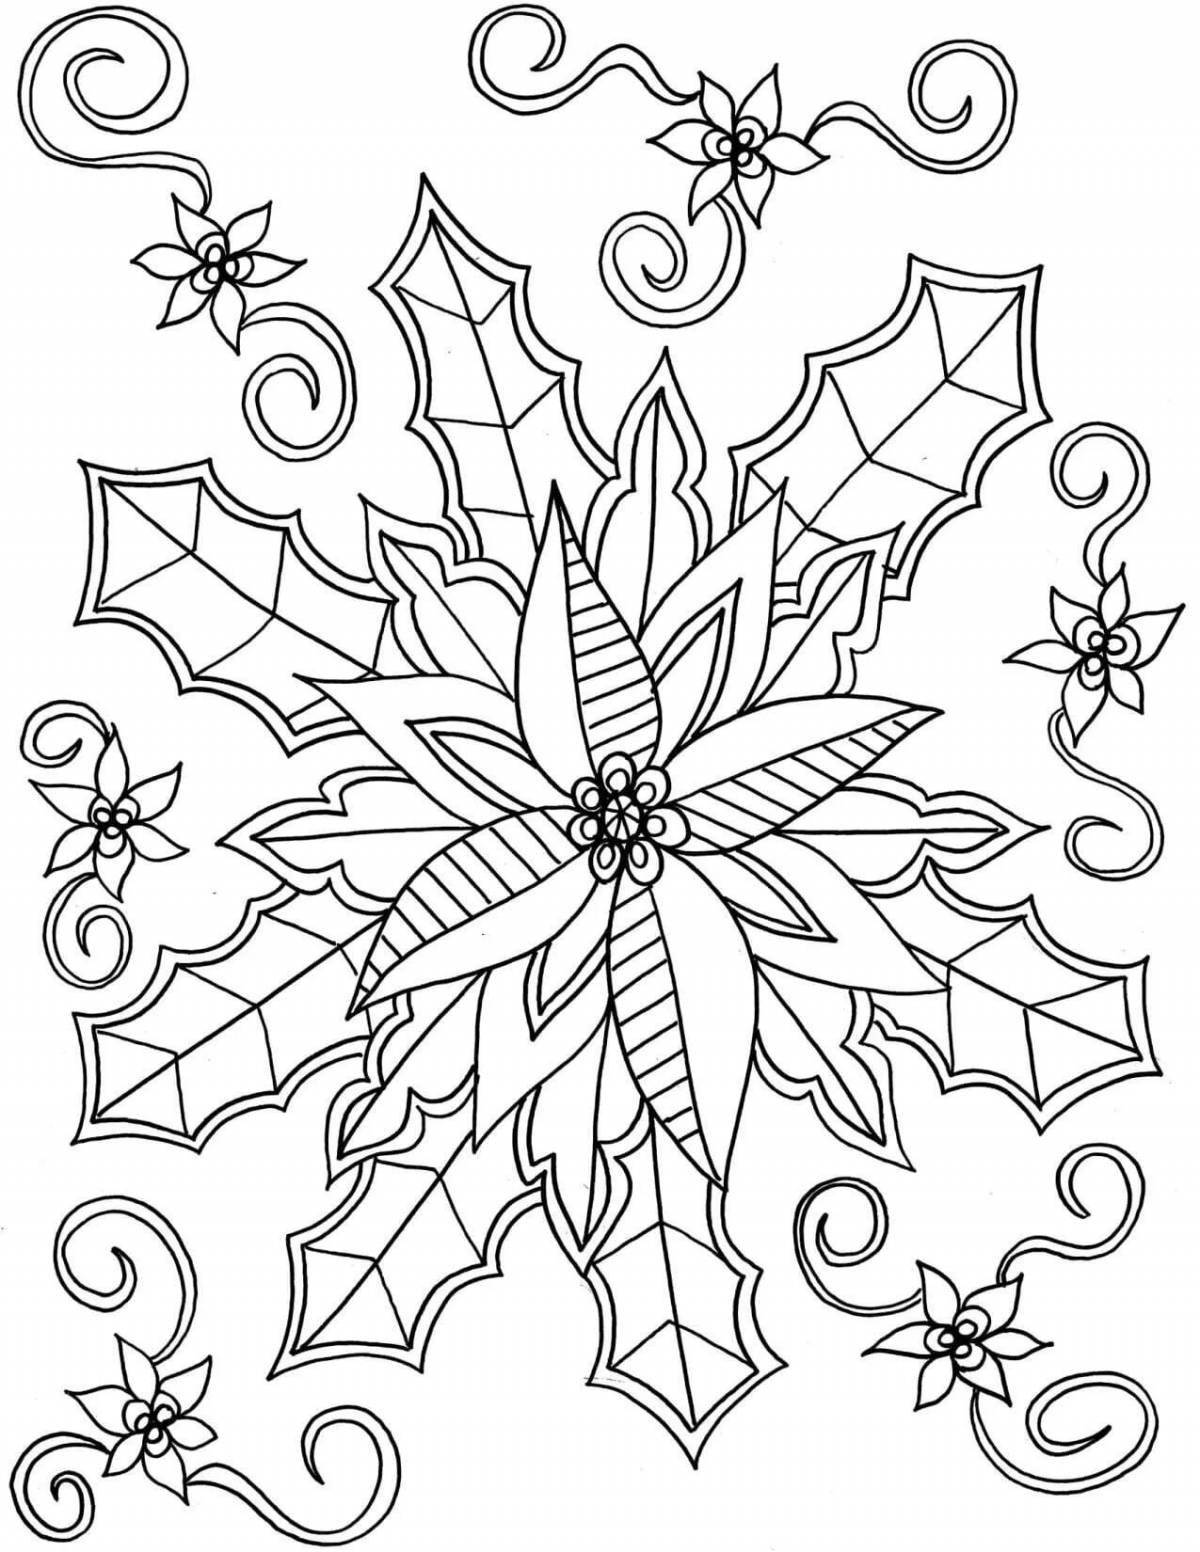 Adorable winter patterns coloring for kids